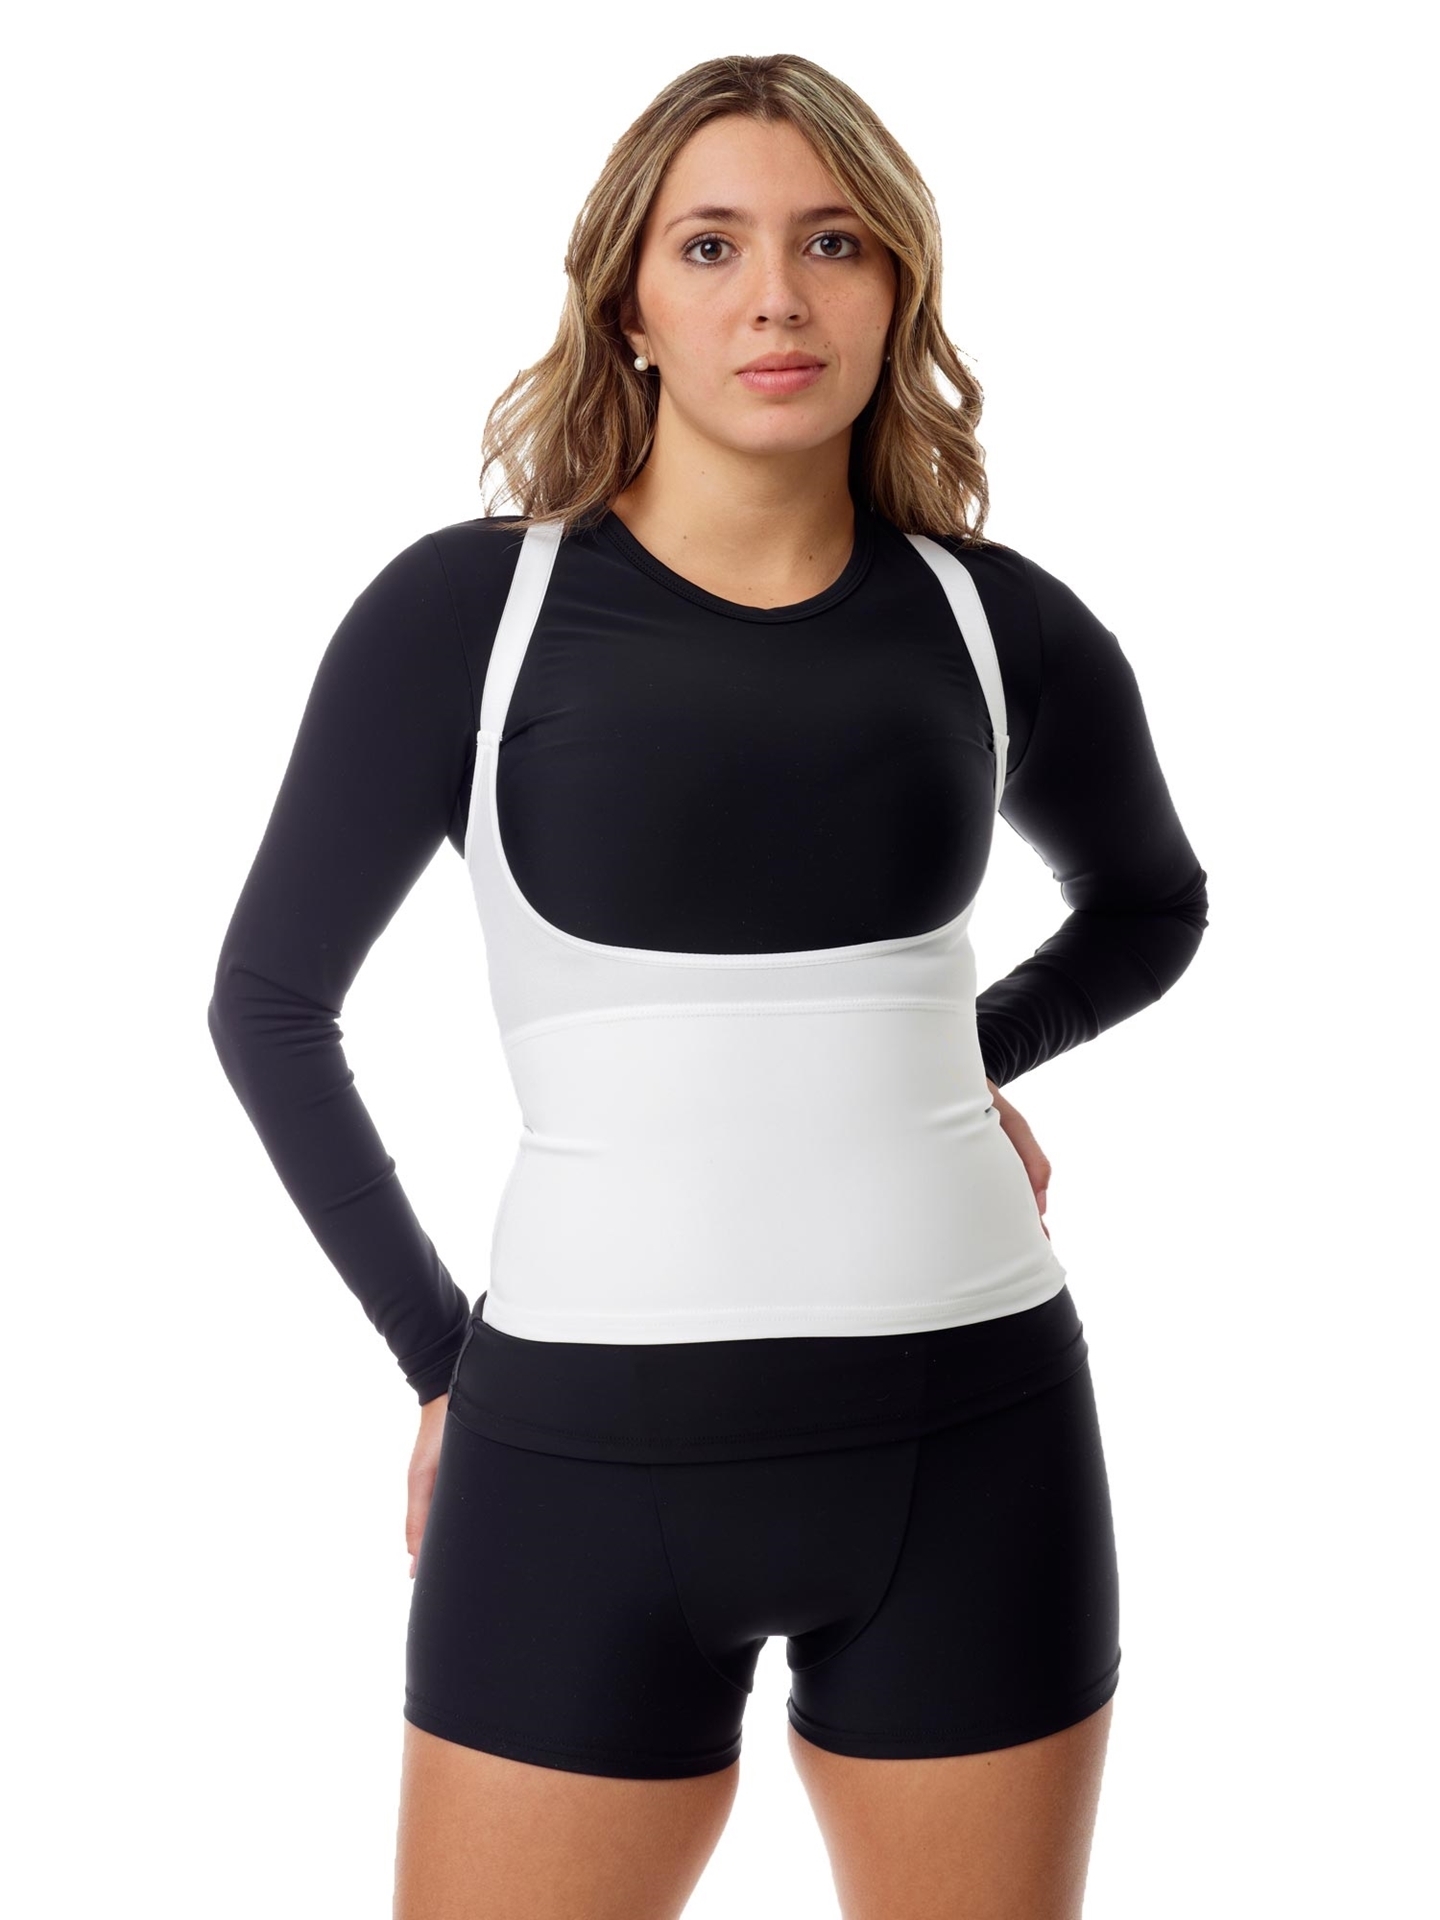 Underworks Womens Firm Open Bust Shaping Tank. Men Compression